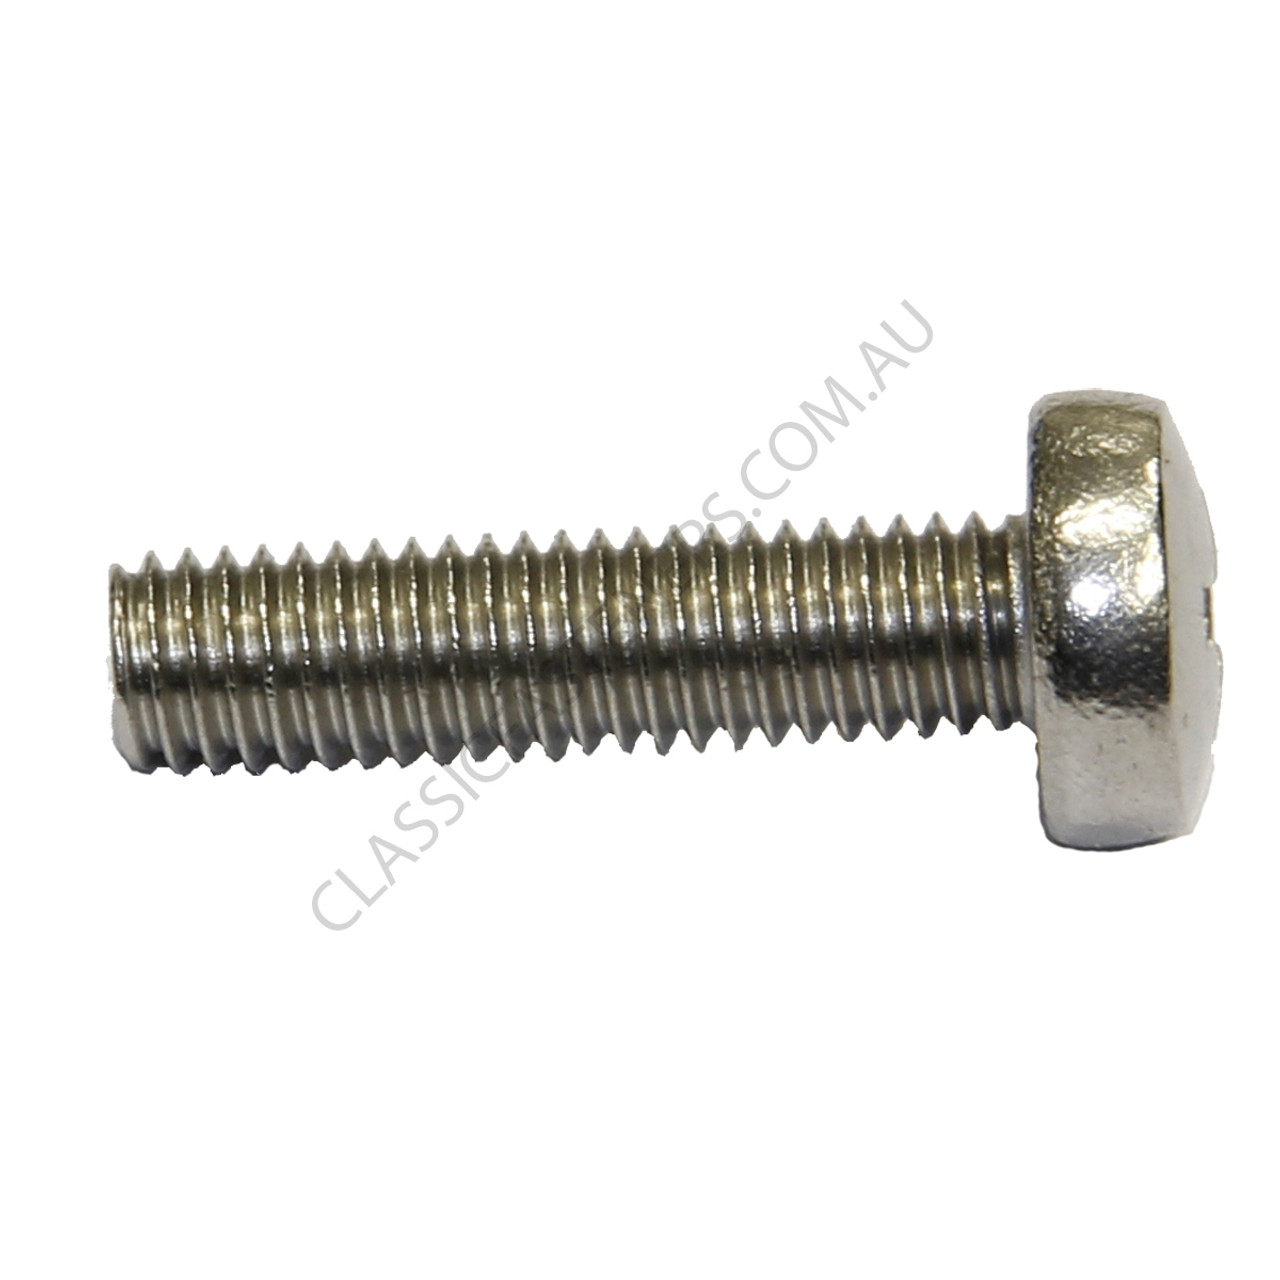 304 Stainless Steel 20 x Screws Self Tapping 2.0mm x 16mm Pan Head 